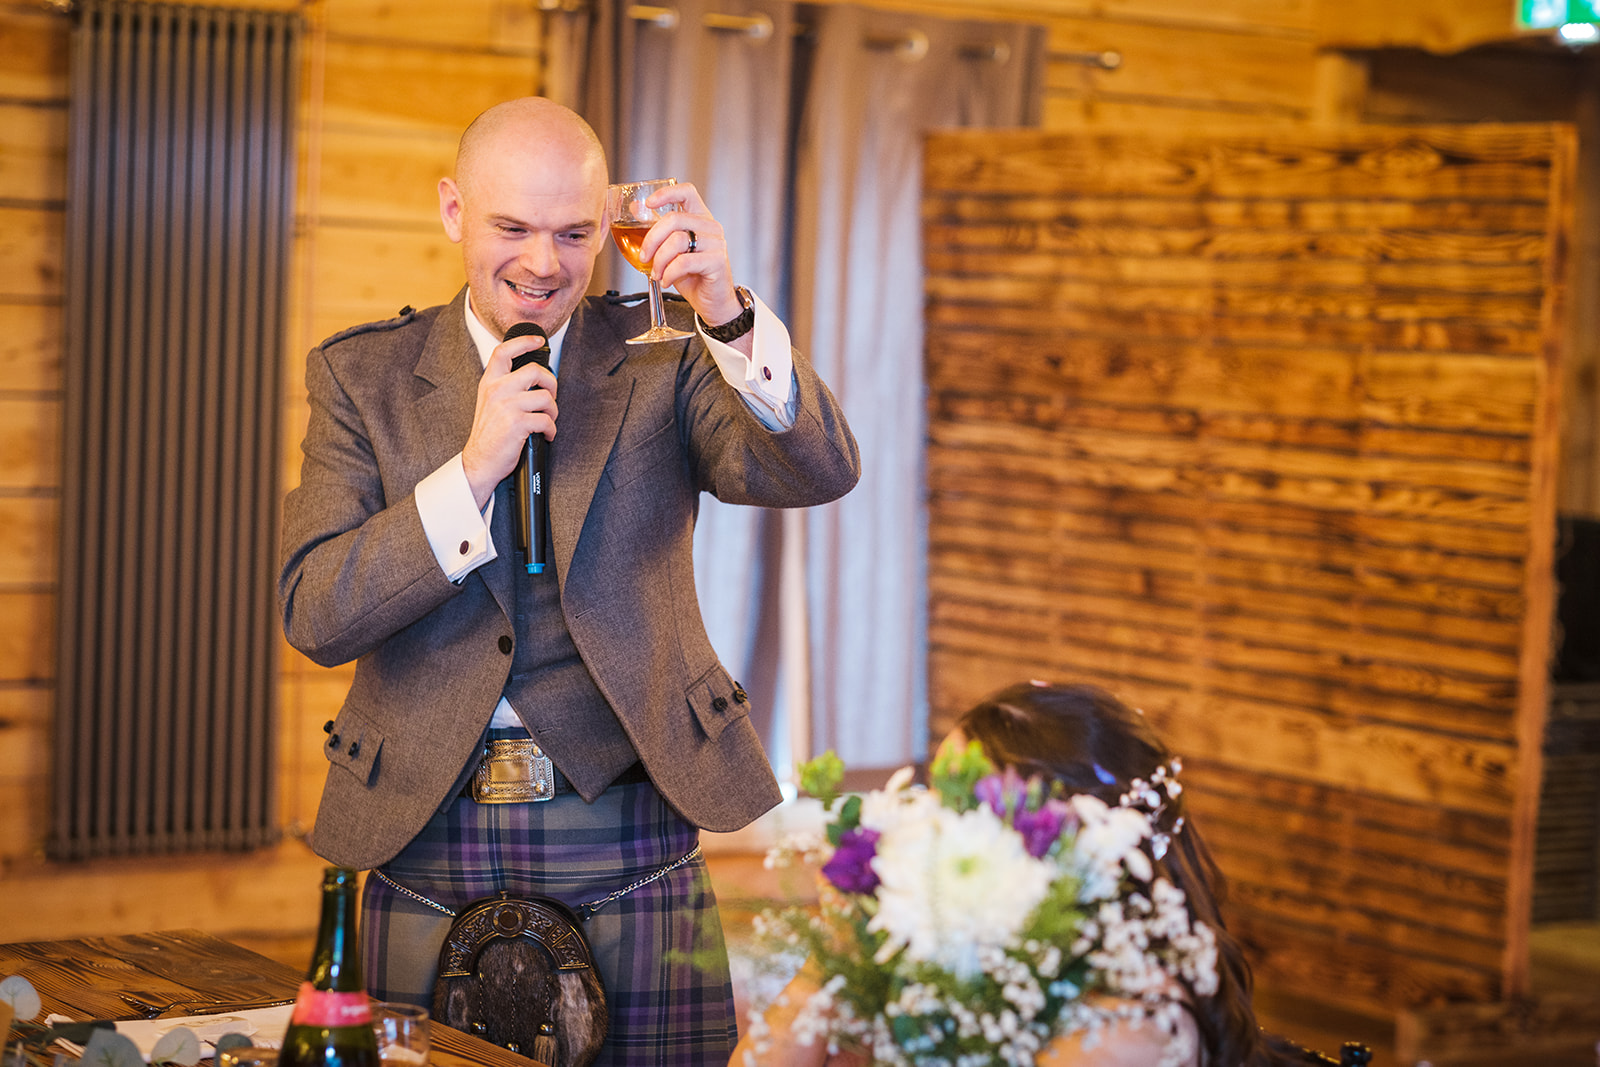 Groom offering up a toast to his beautiful bride at their wedding in Scotland.